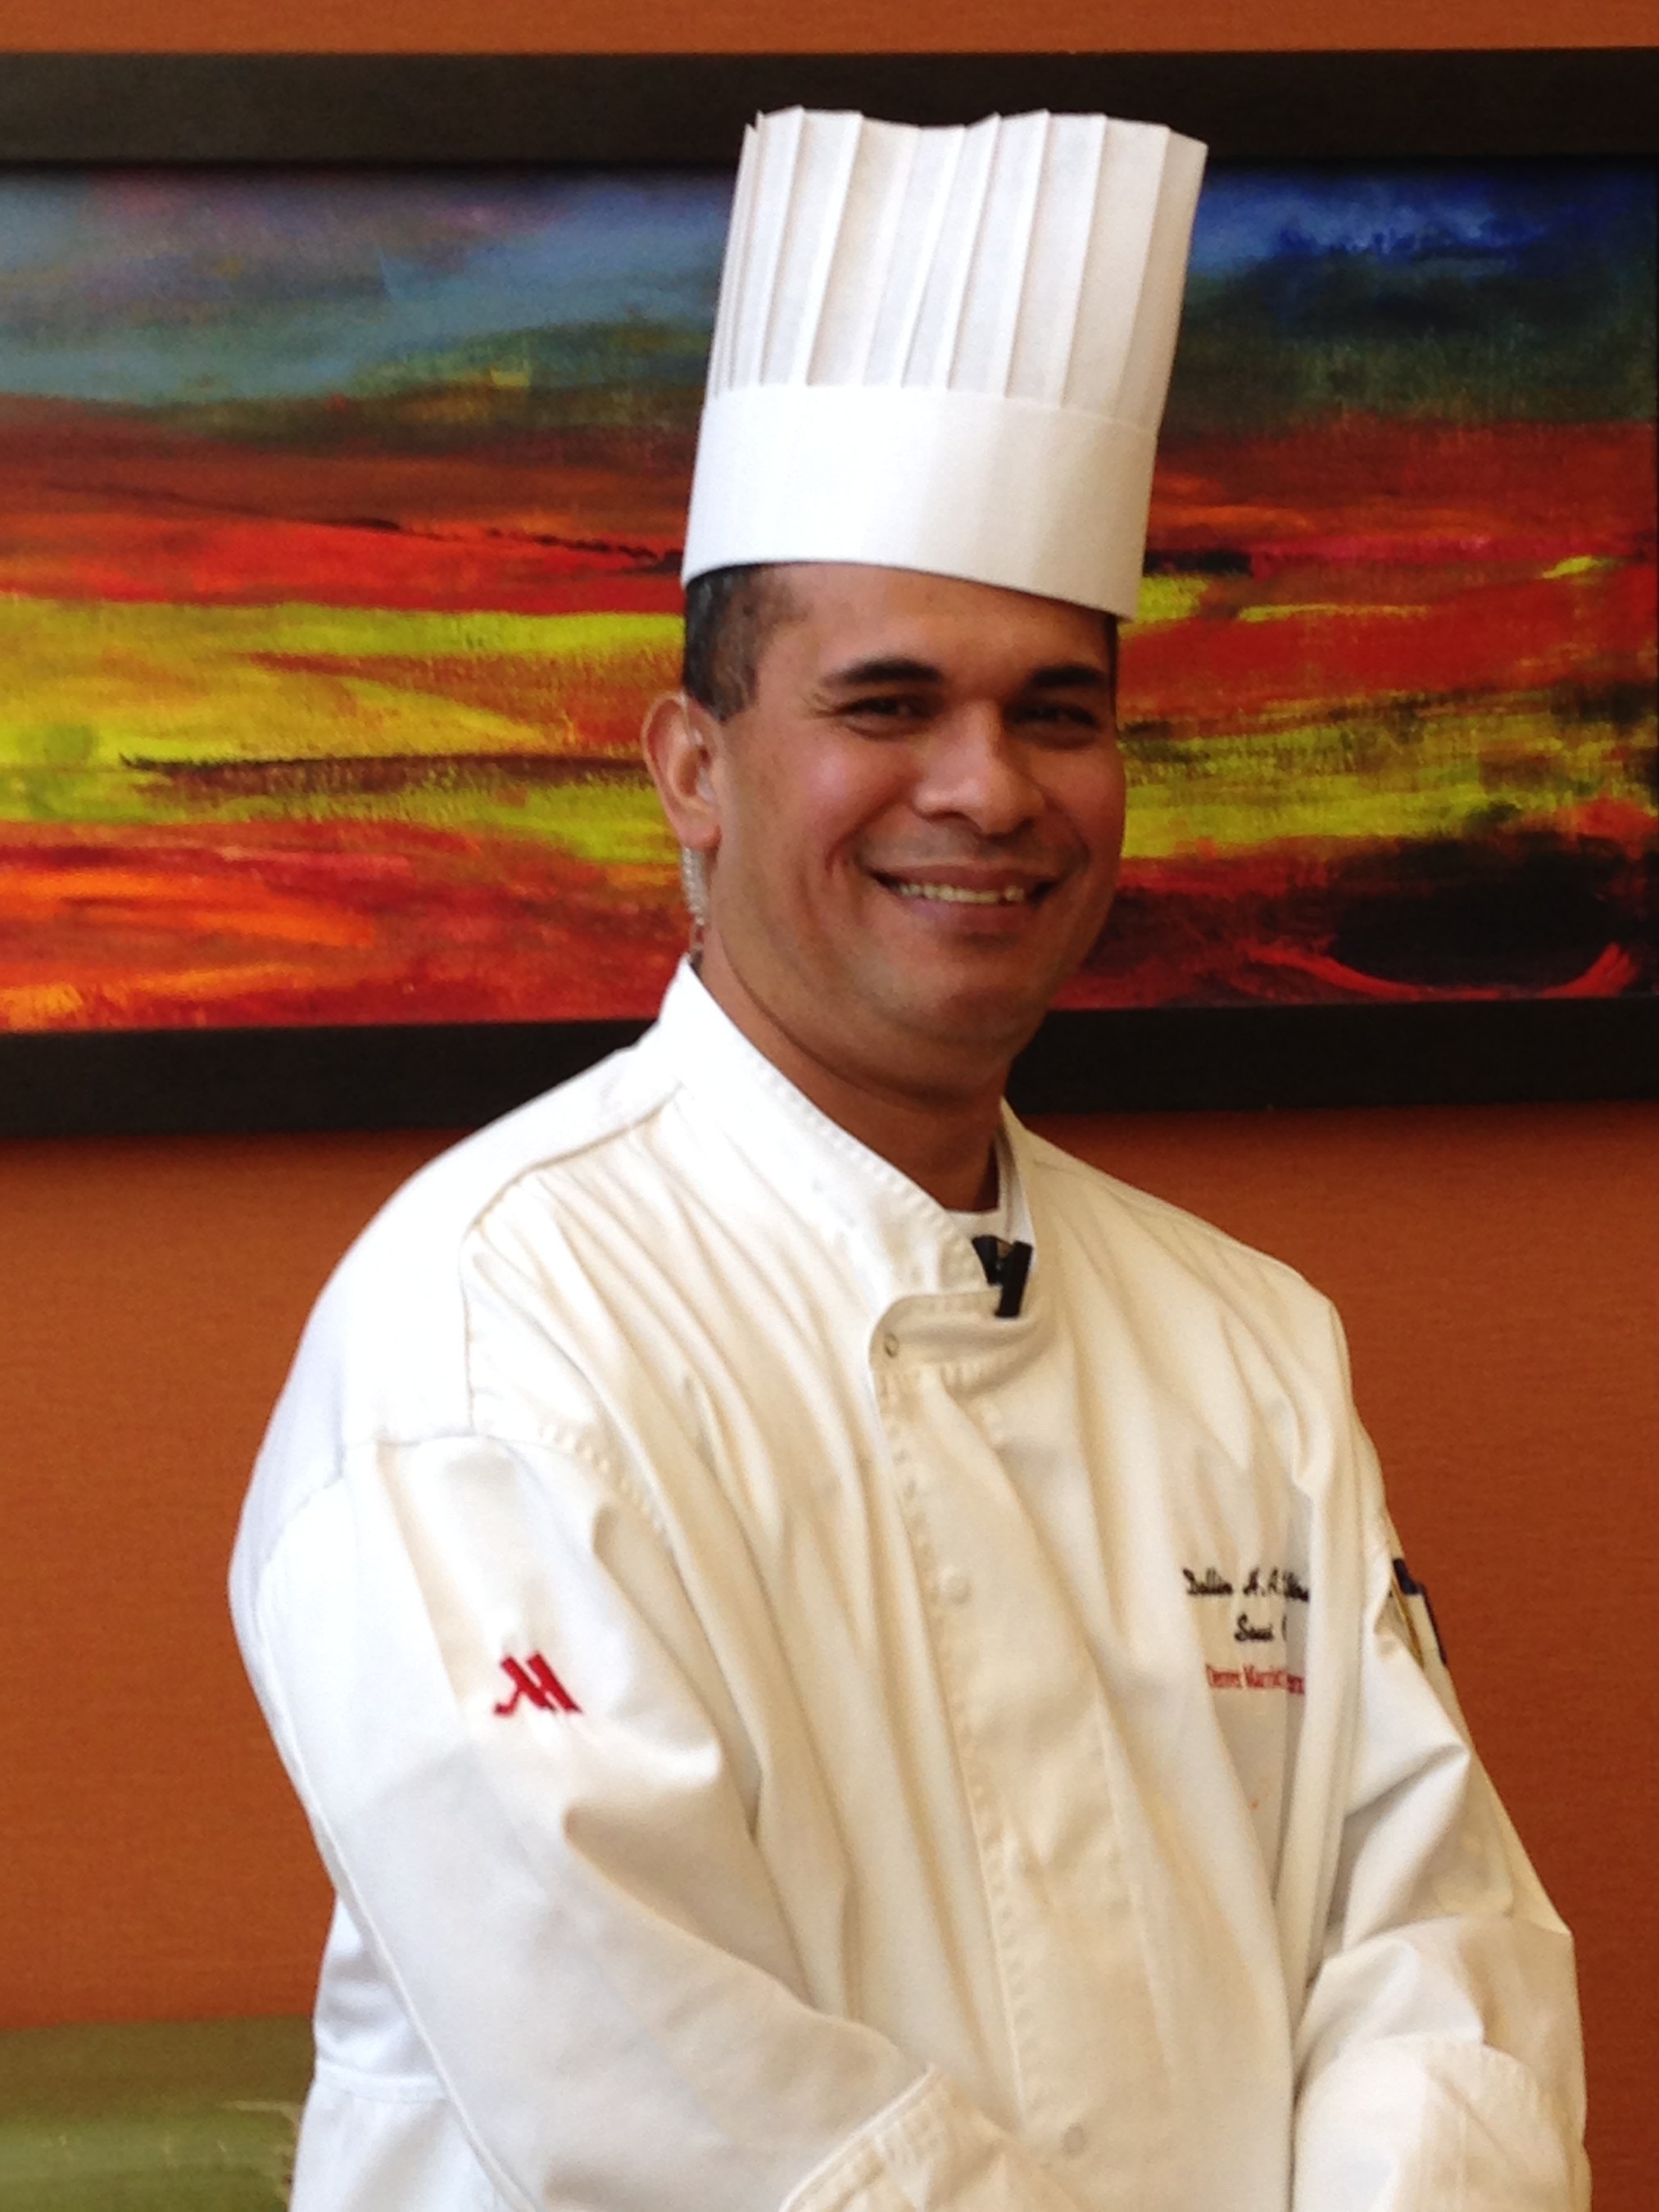 Denver Marriott Tech Center is proud to announce that Dallin H.A.T. Young has been named the executive sous chef of the hotel. Young has served in many professional kitchens, and brings years of experience to the table at The Lift Restaurant & Lounge.